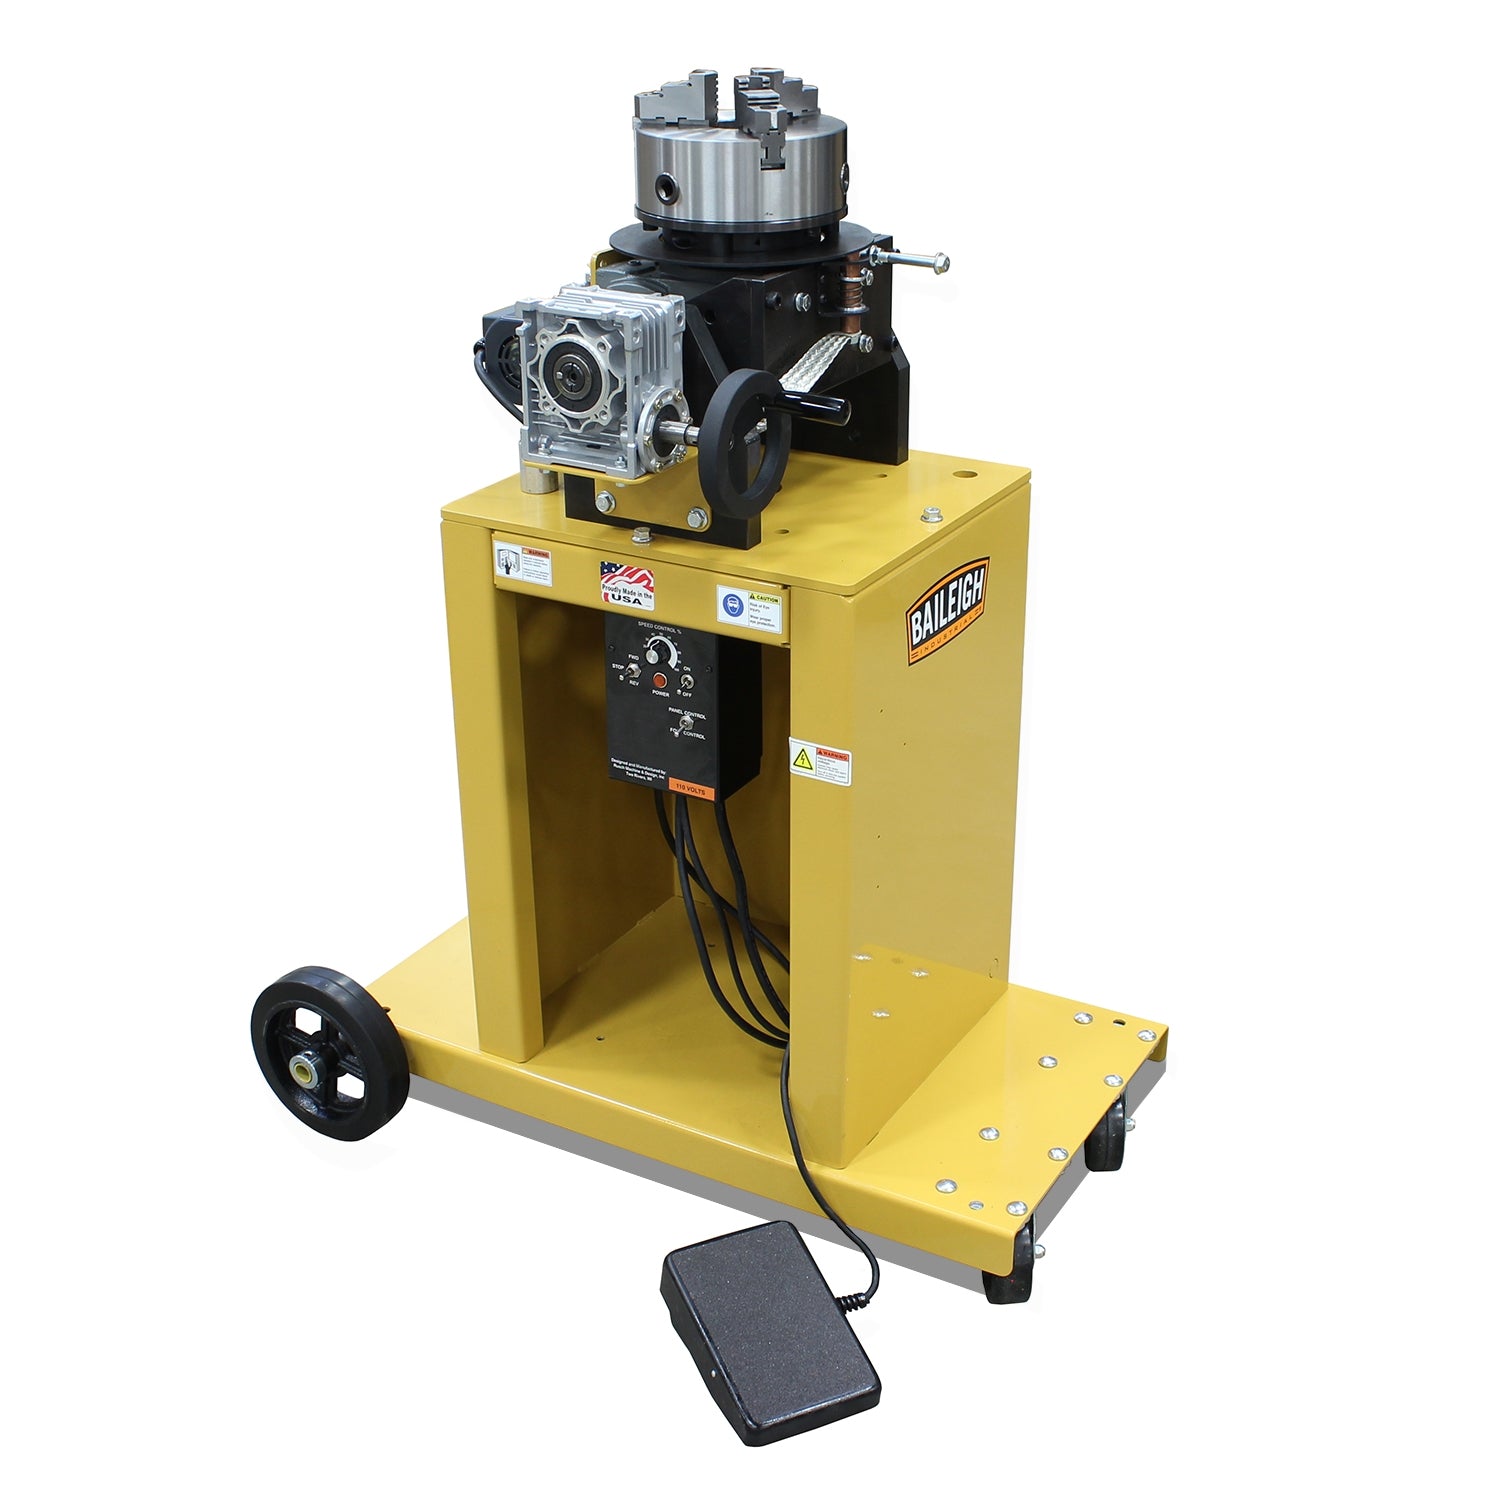 Baileigh WP-1800F Welding Positioner, 8" 3-jaw chuck with 2-3/8" Through Hole, Cart Mounted